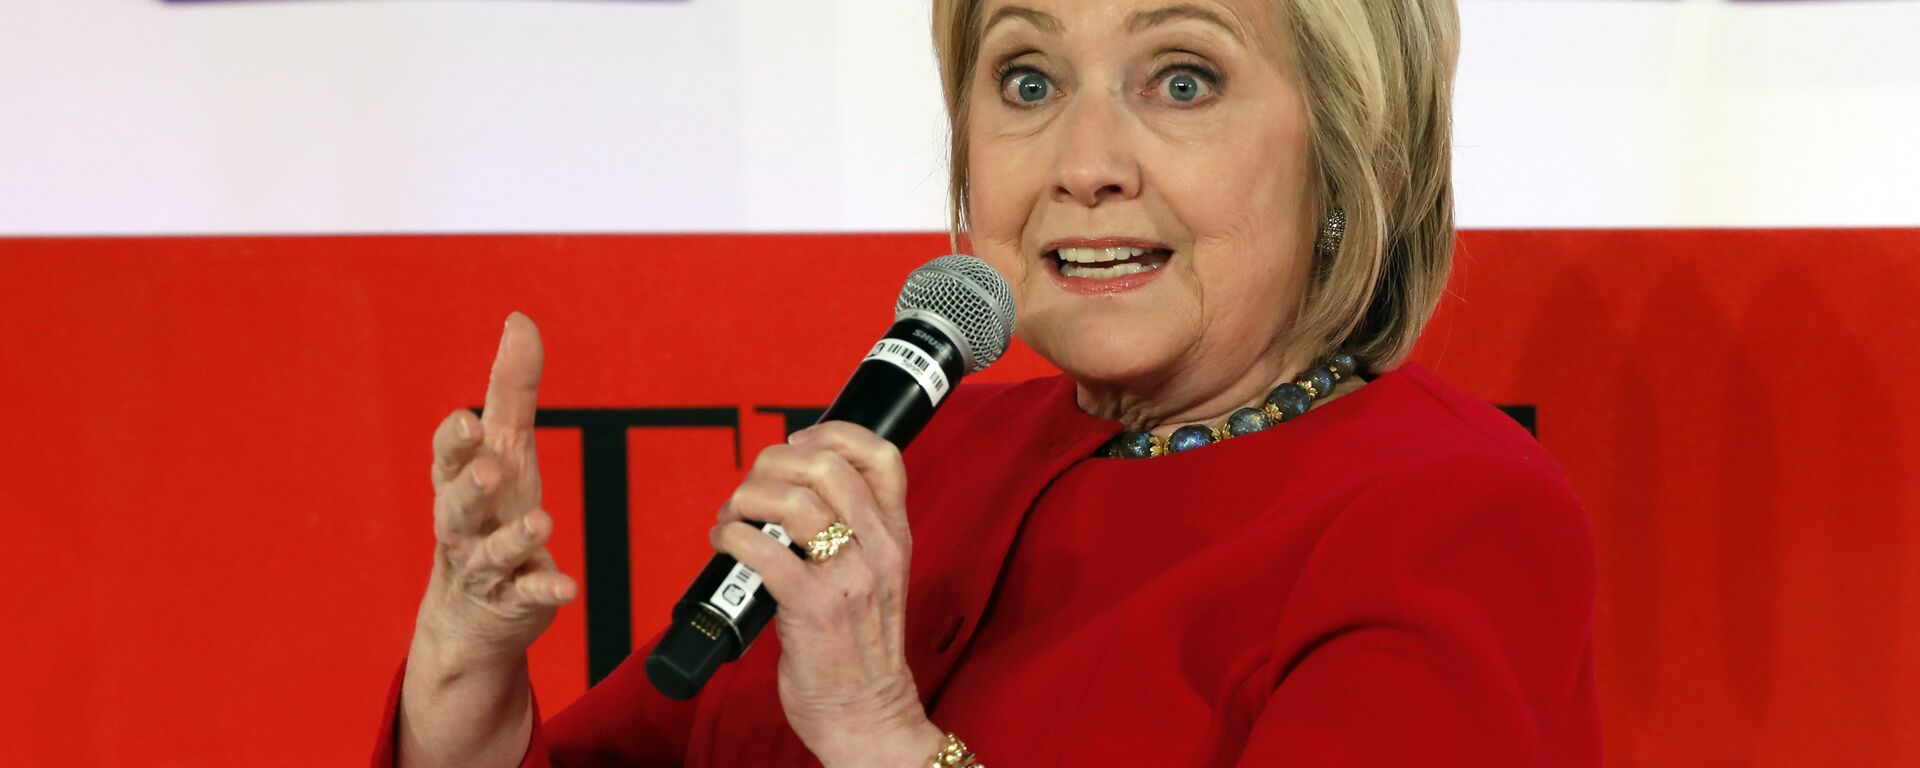 Hillary Clinton speaks during the TIME 100 Summit, in New York, Tuesday, April 23, 2019 - Sputnik International, 1920, 30.04.2022